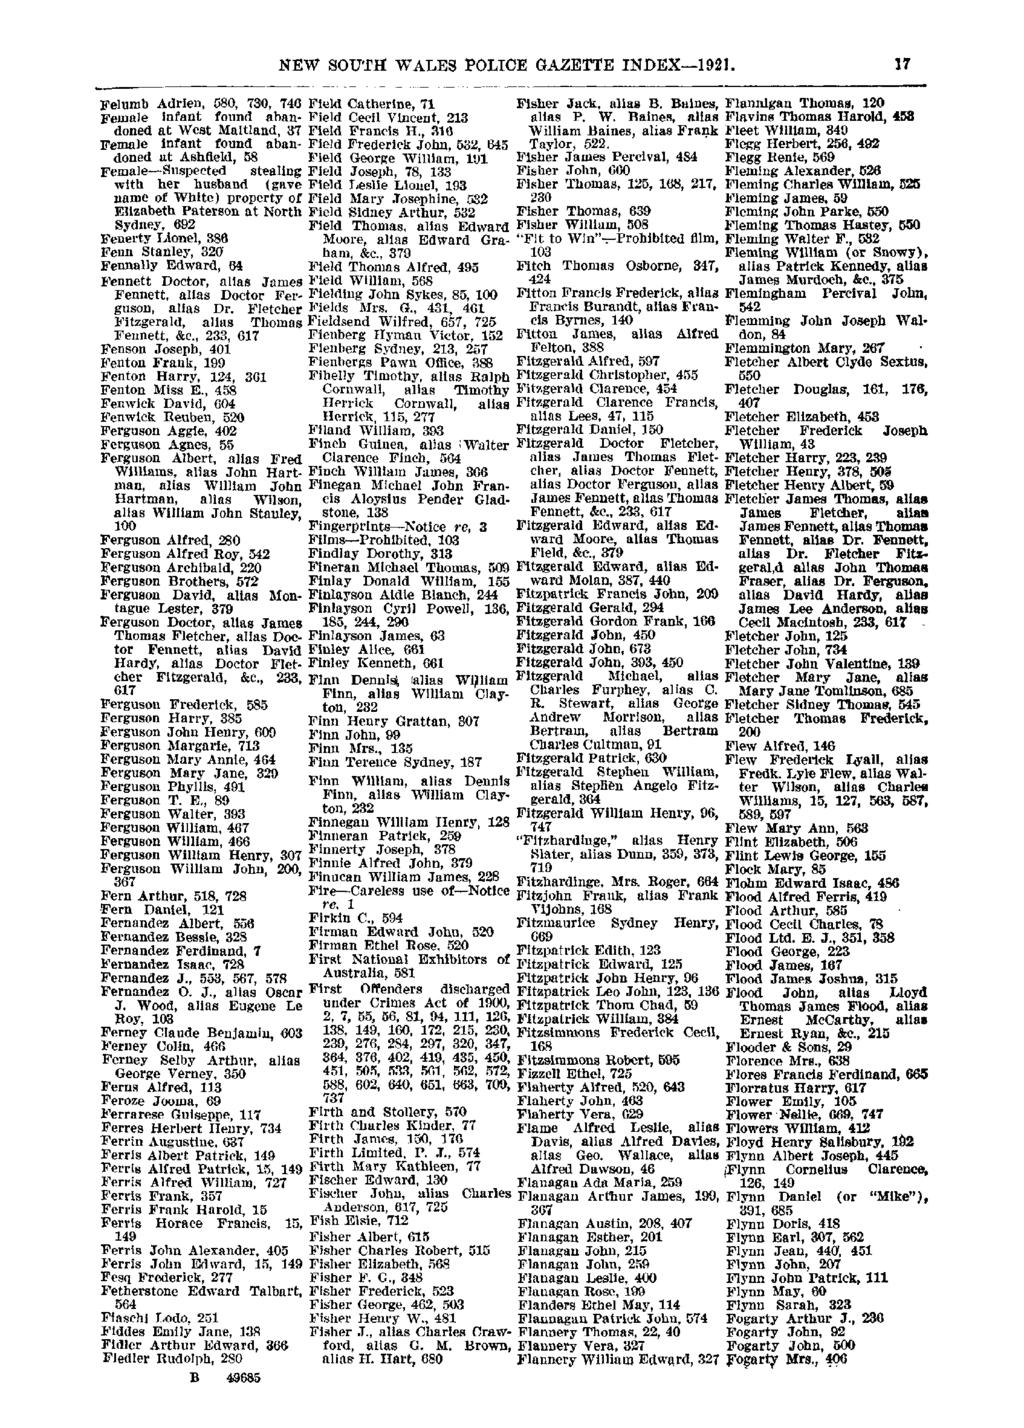 NEW SOUTI.1 WALES POLICE GAZETTE INDEX- 1921. 17 Felmnb Adrien, 580, 730, 746 Field Catherine, 71 Female infant doned at West found aban- Field Cecil Vincent, 213 Maitland, 37 Field Francis H.